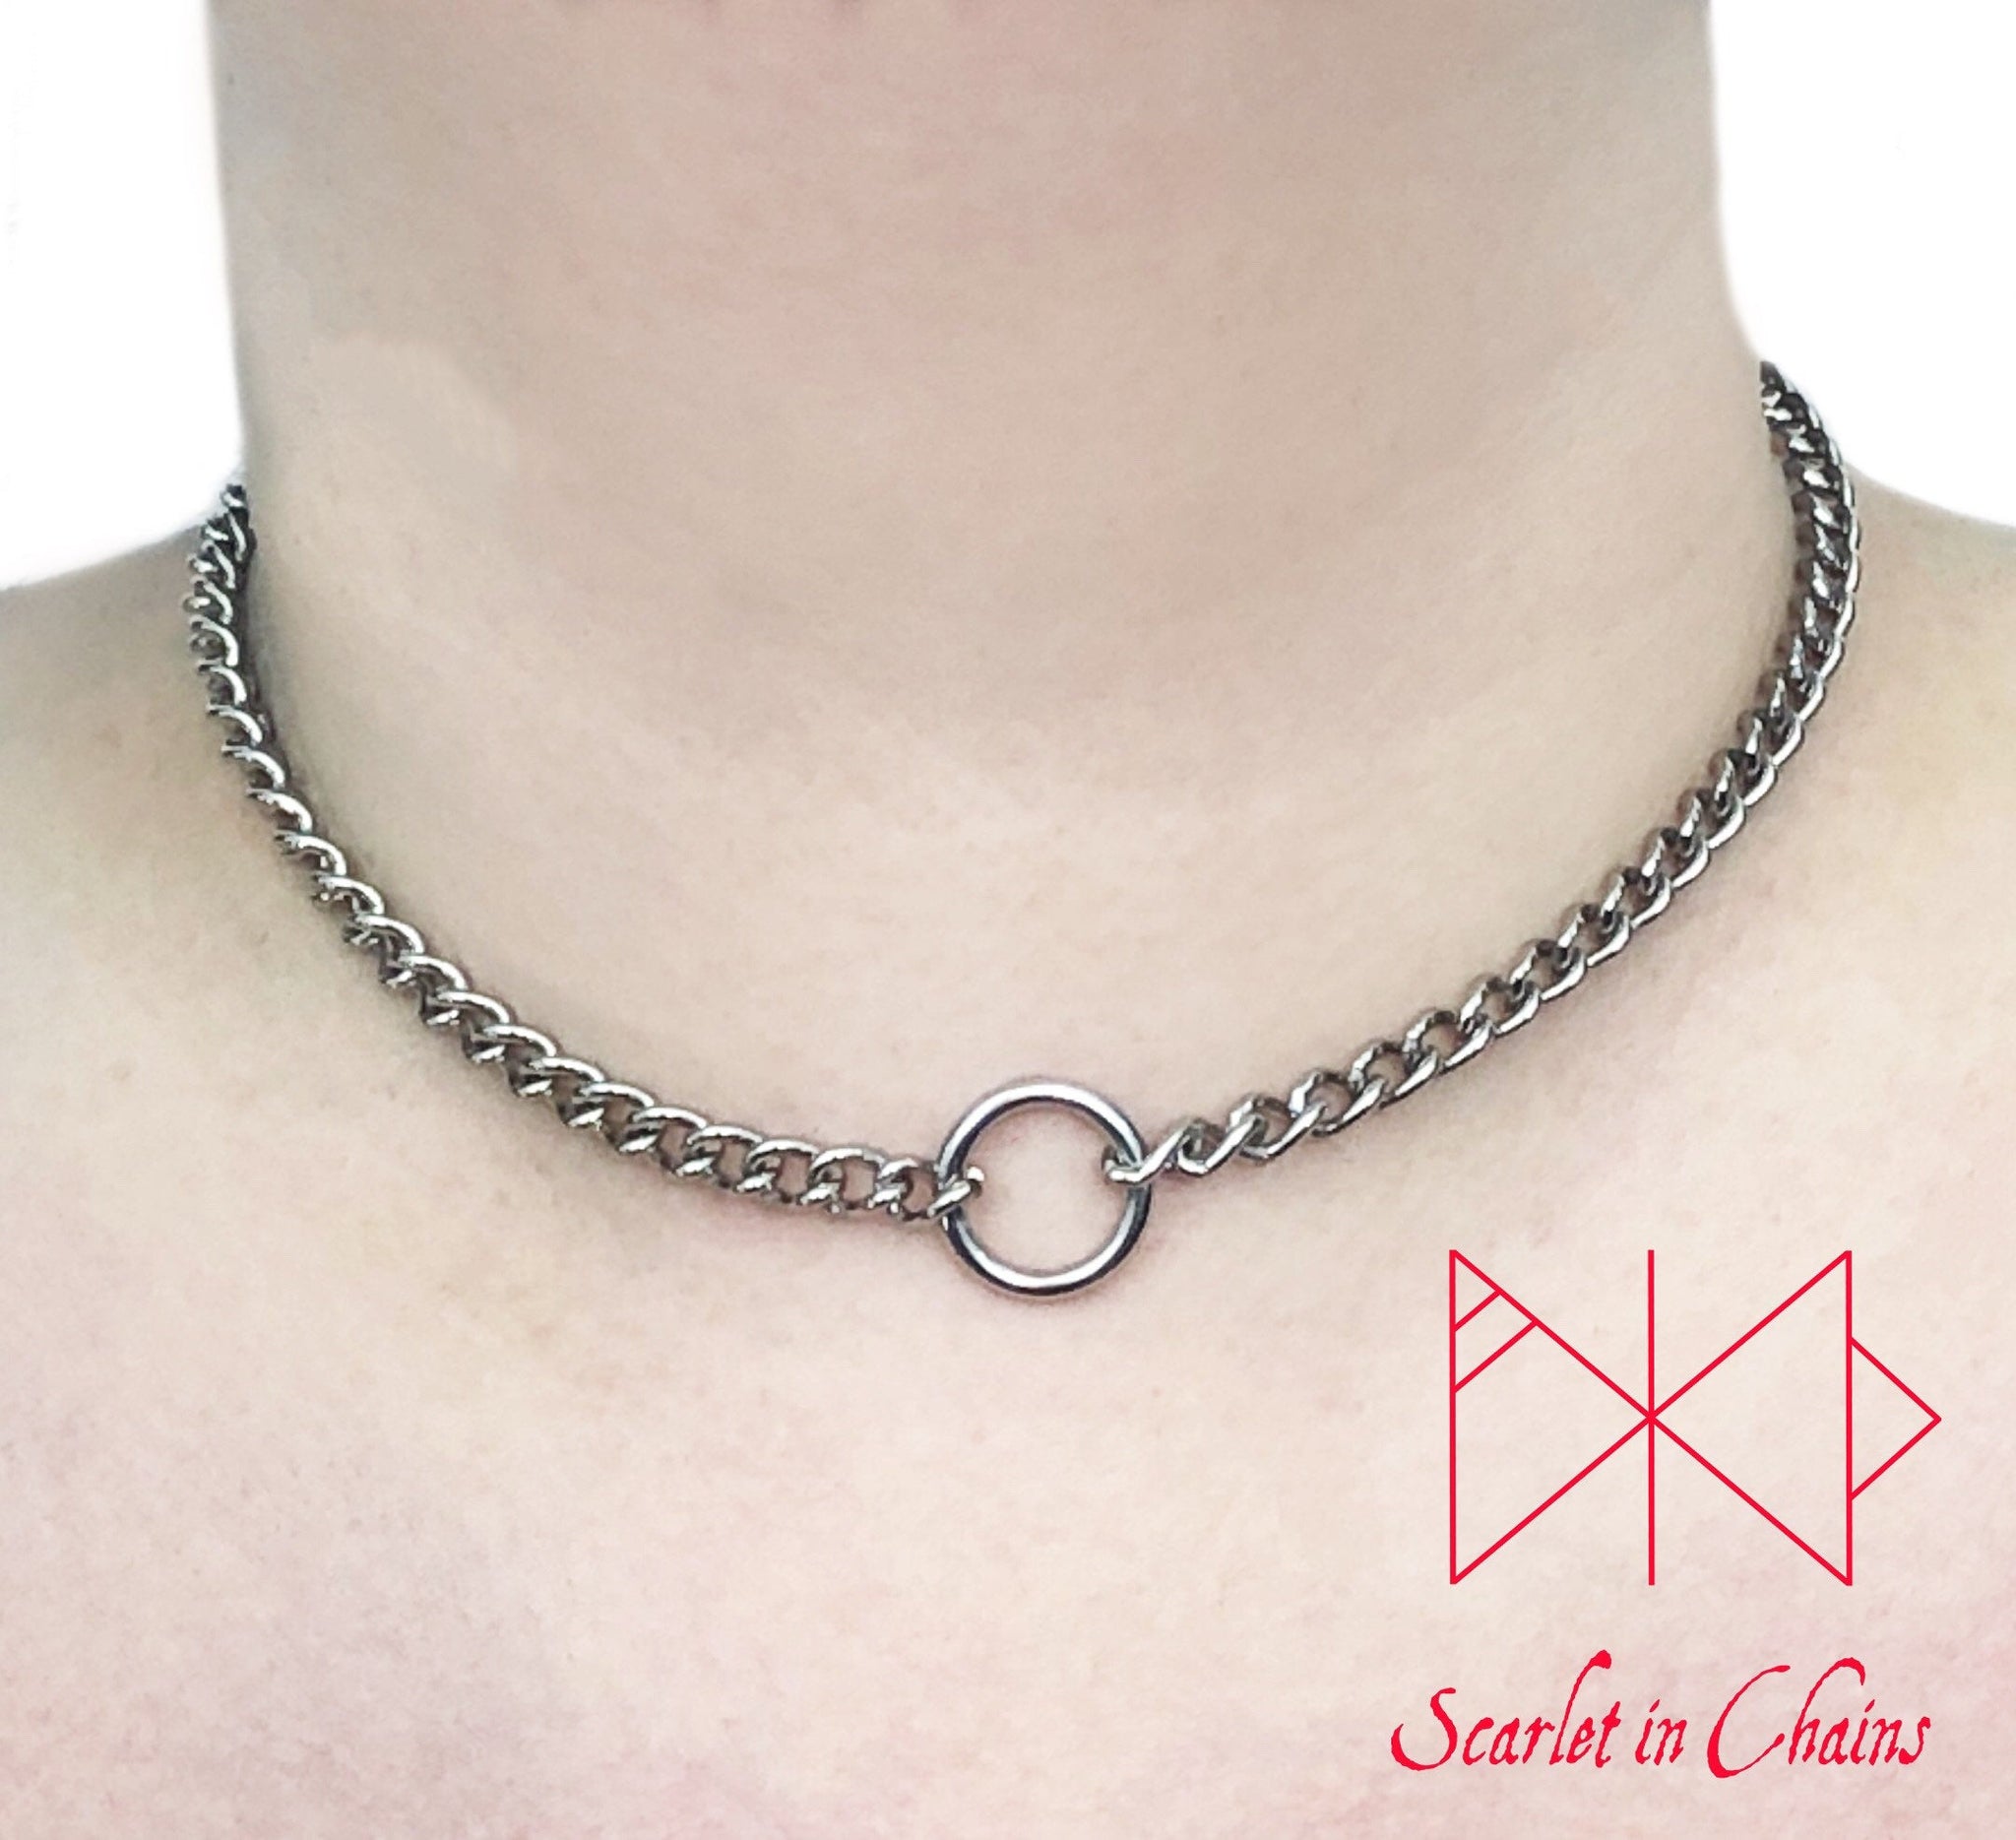 Stainless steel micro chain O ring collar worn